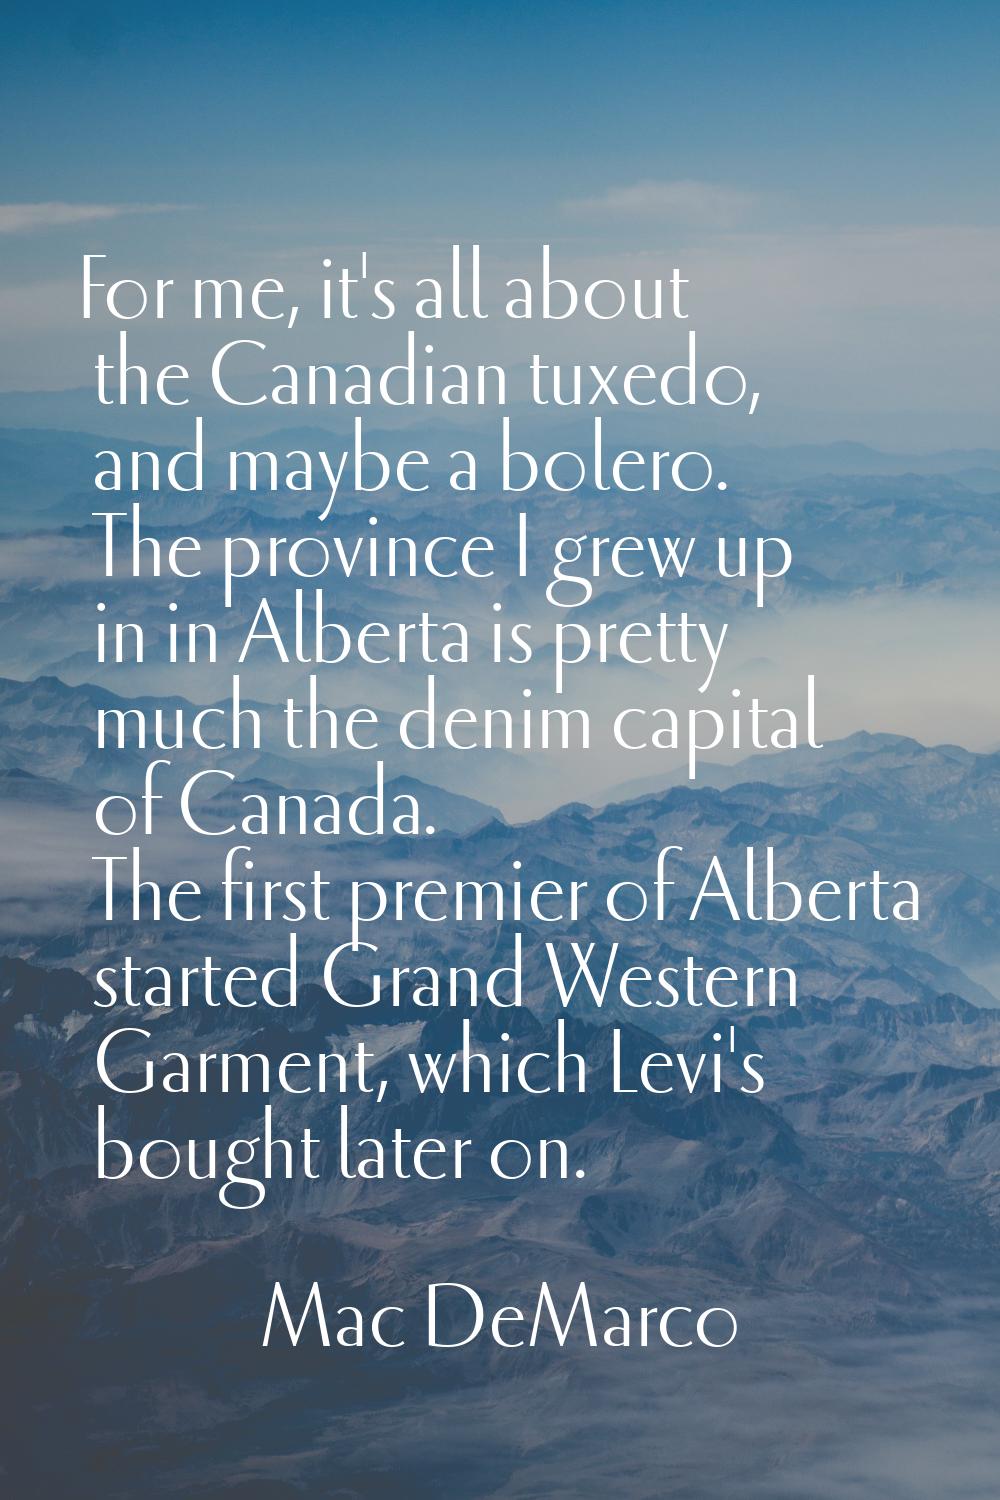 For me, it's all about the Canadian tuxedo, and maybe a bolero. The province I grew up in in Albert